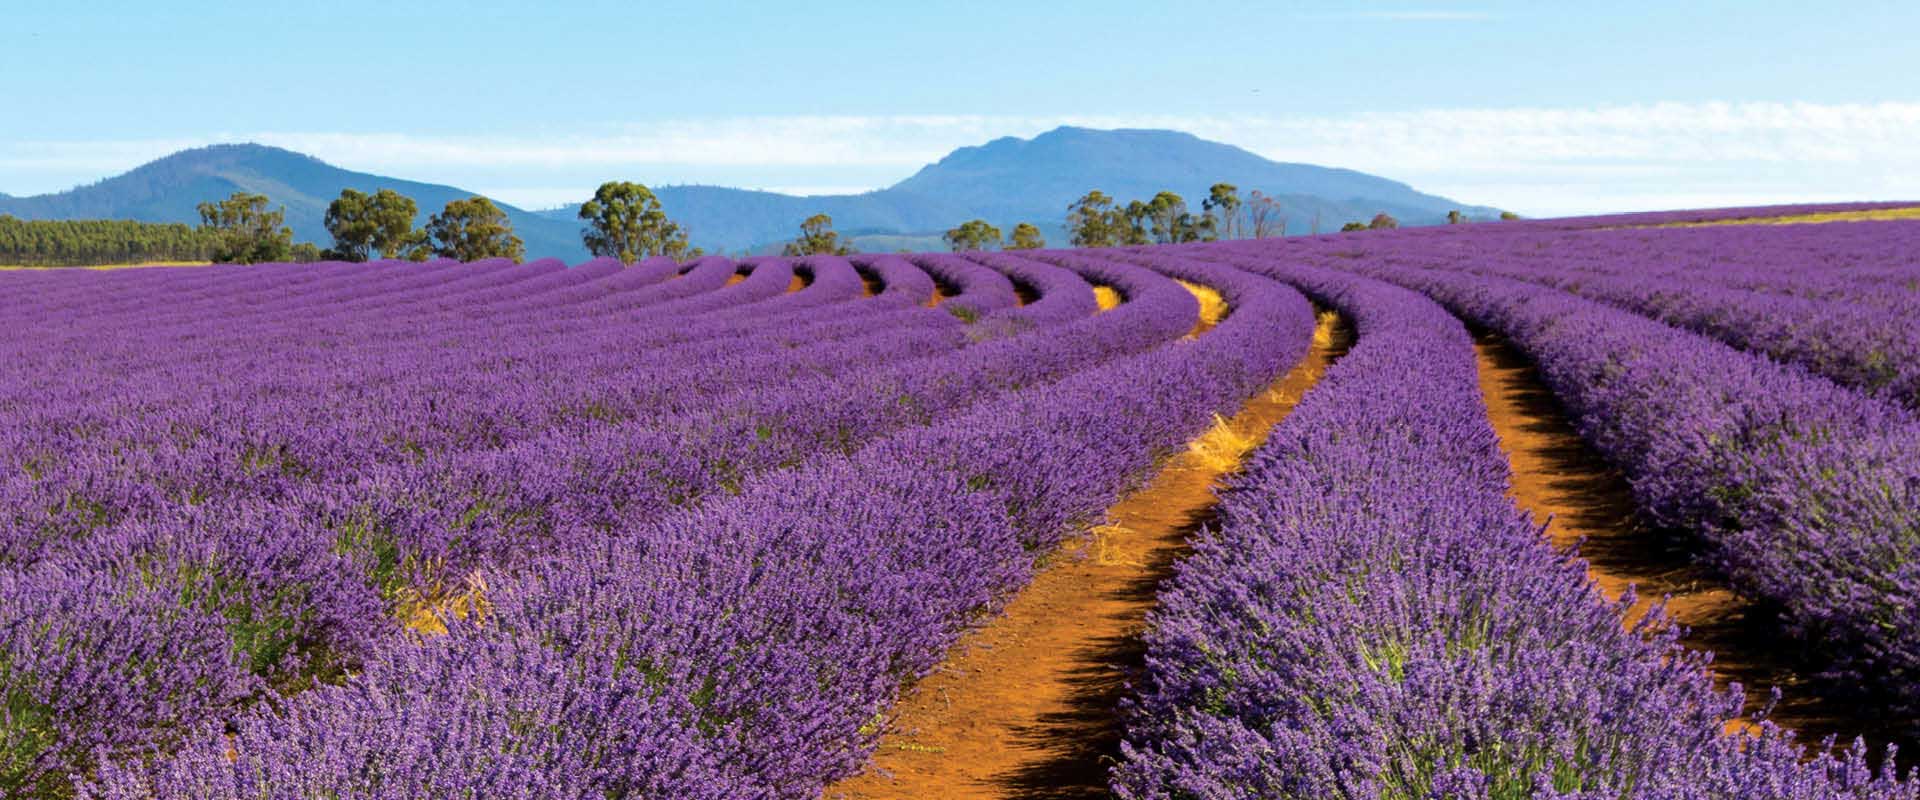 Rows and rows of lavender in full flower